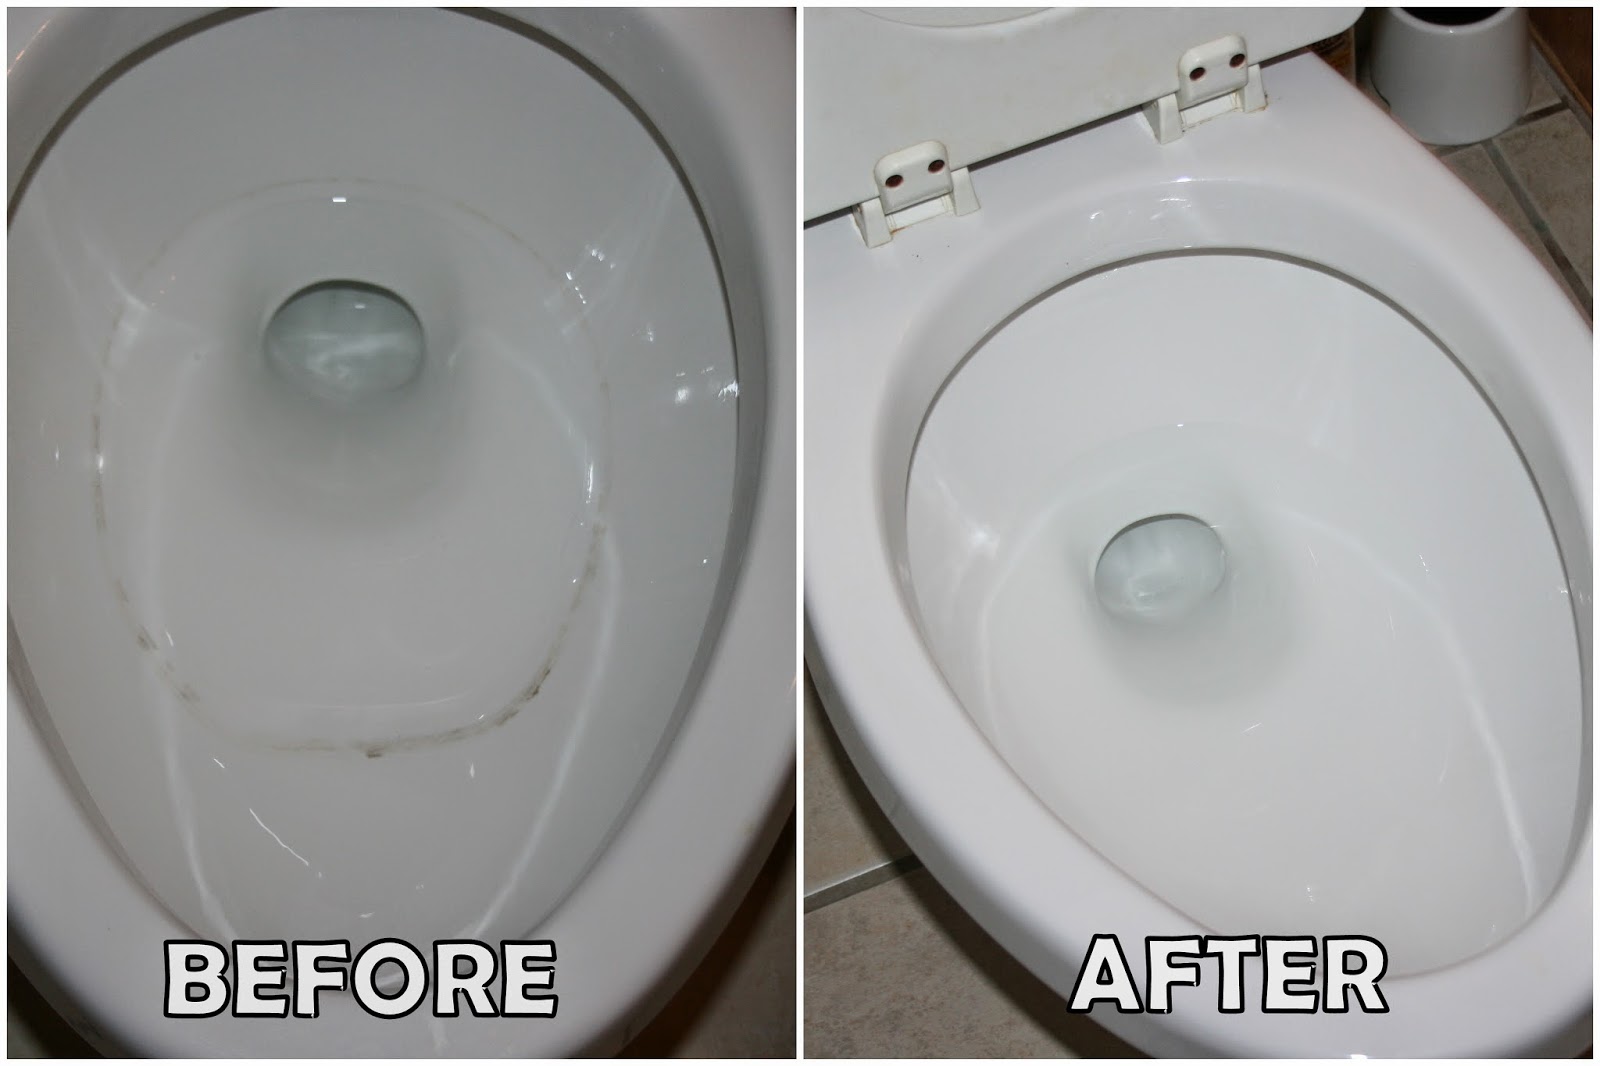 What causes a black ring in the toilet?